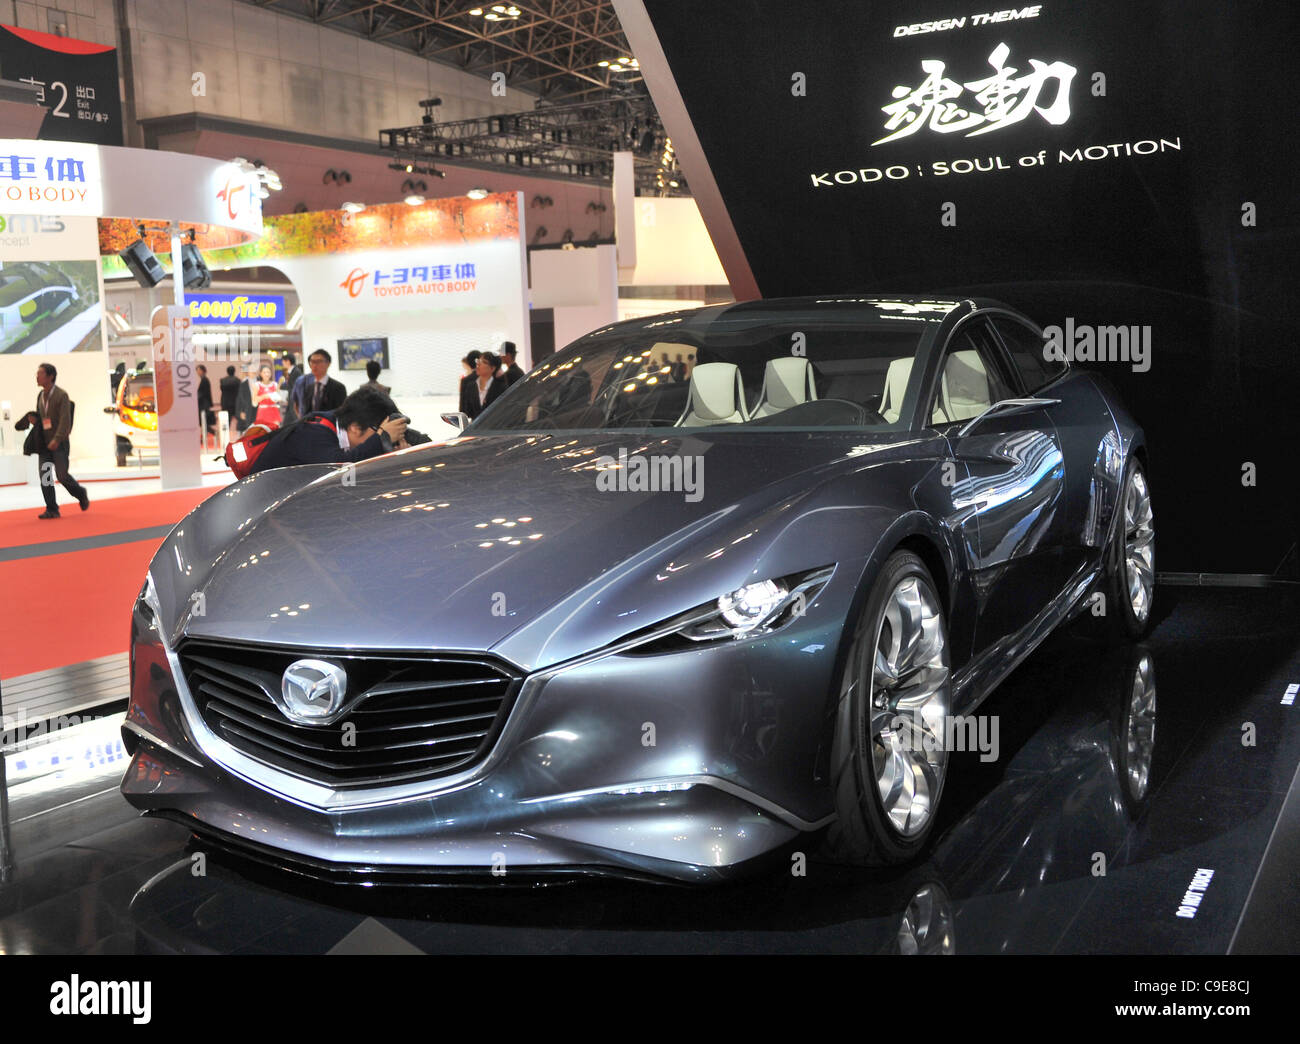 November 30, 2011, Tokyo, Japan - Shinari with Mazdas new design theme of 'KoDo - Soul of Motion'' is exhibited during a press preview of the Tokyo Motor Show on Wednesday, November 30, 2011. ..The Tokyo Motor Show opened to the press Wednesday as Japanese automakers unveiled a bevy of electric cars Stock Photo